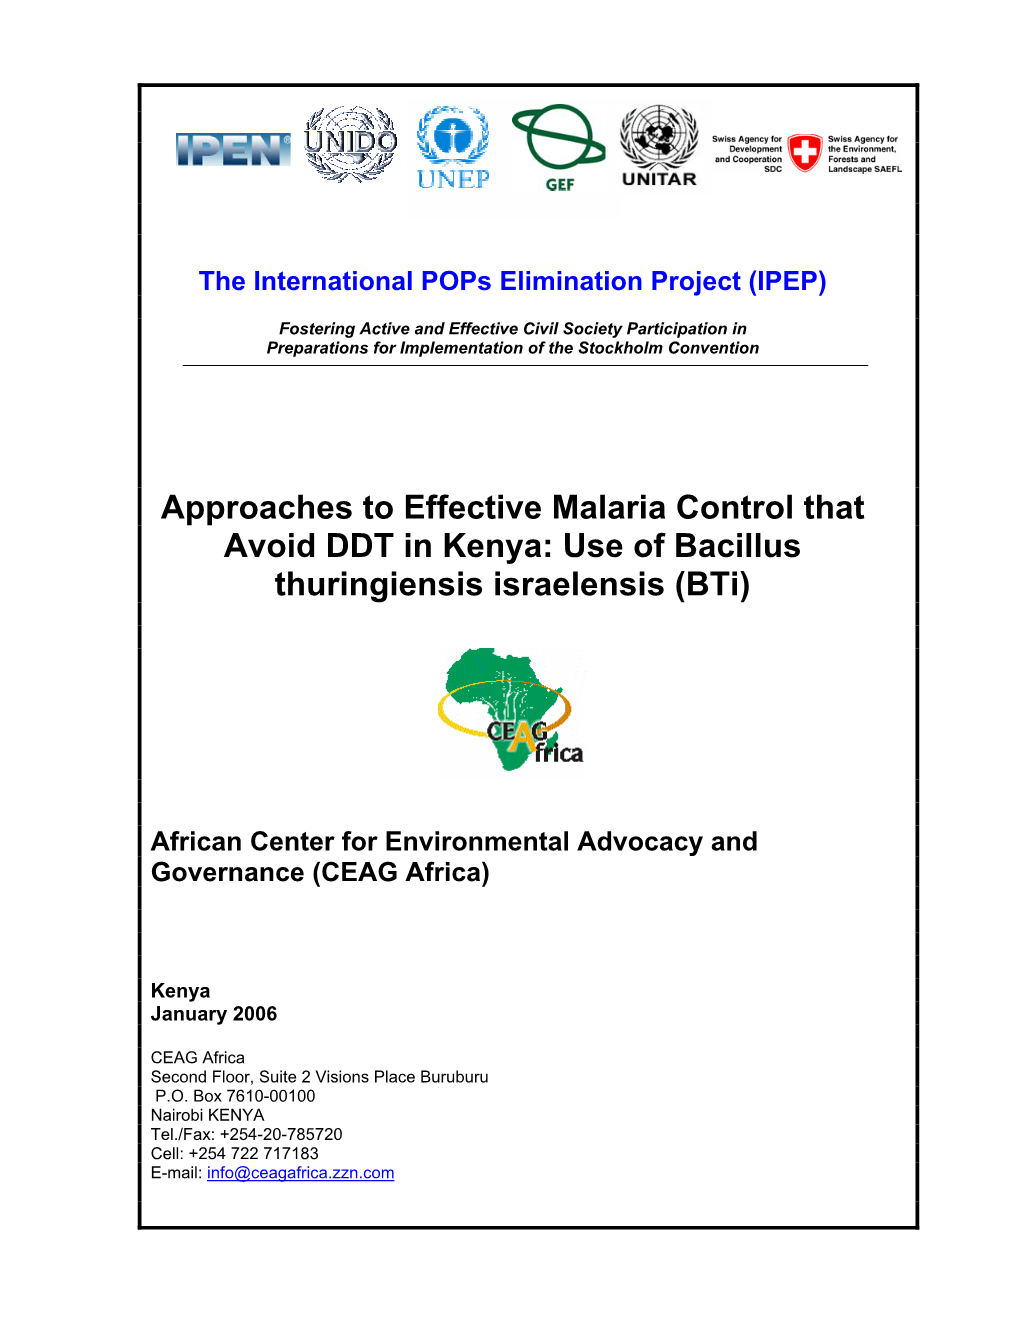 Approaches to Effective Malaria Control That Avoid DDT in Kenya: Use of Bacillus Thuringiensis Israelensis (Bti)